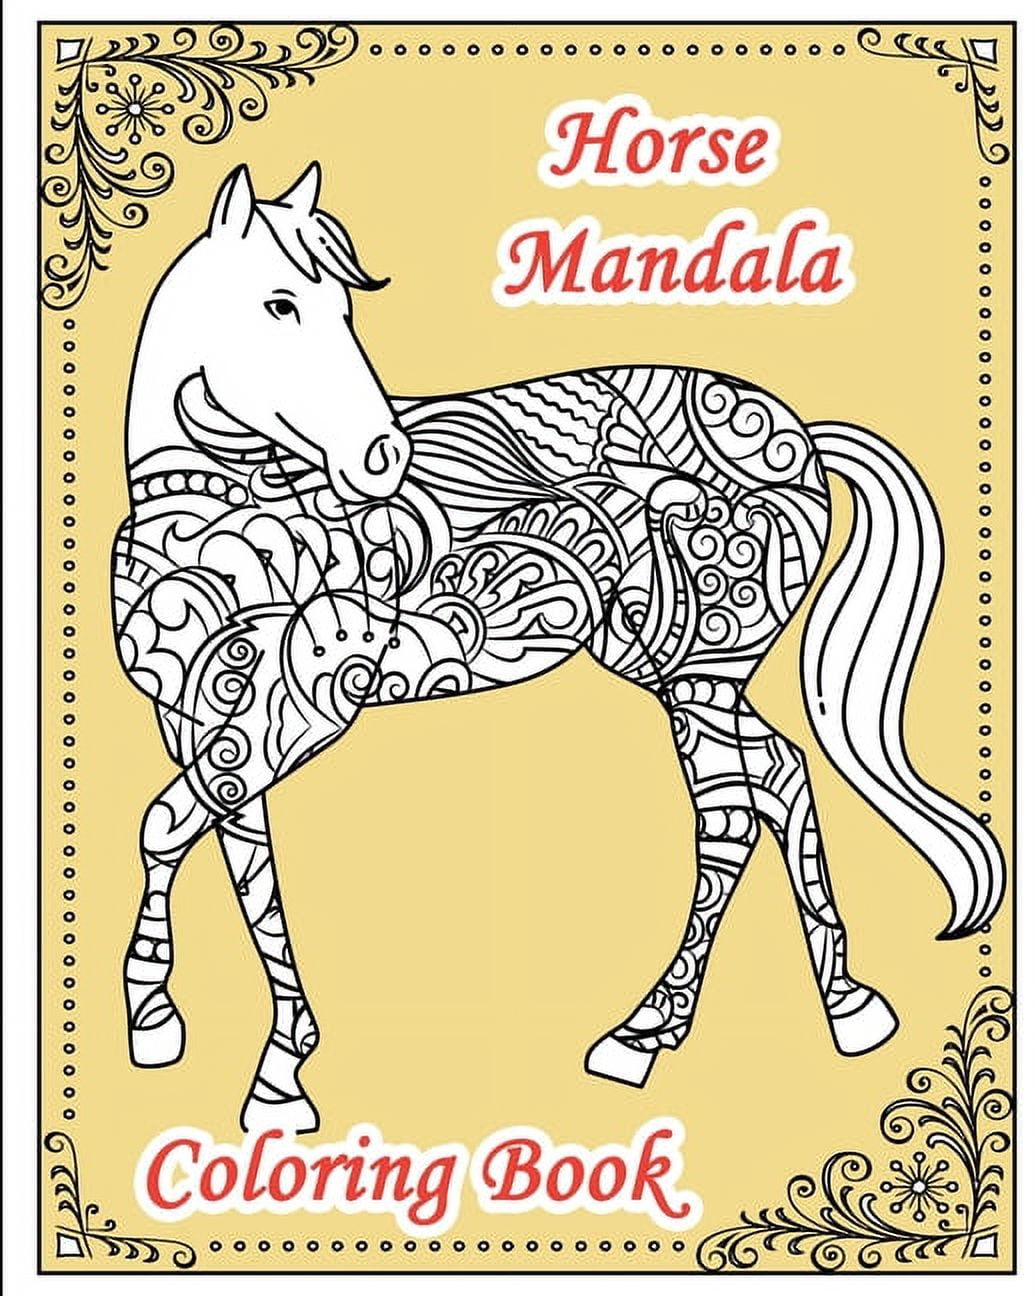 Adult Coloring Books For Men Women And Kids Motivational Inspirational  Advanced Illustrations Of The Best Horse Pages With Mandala Flowers And  Cute .. (Paperback)